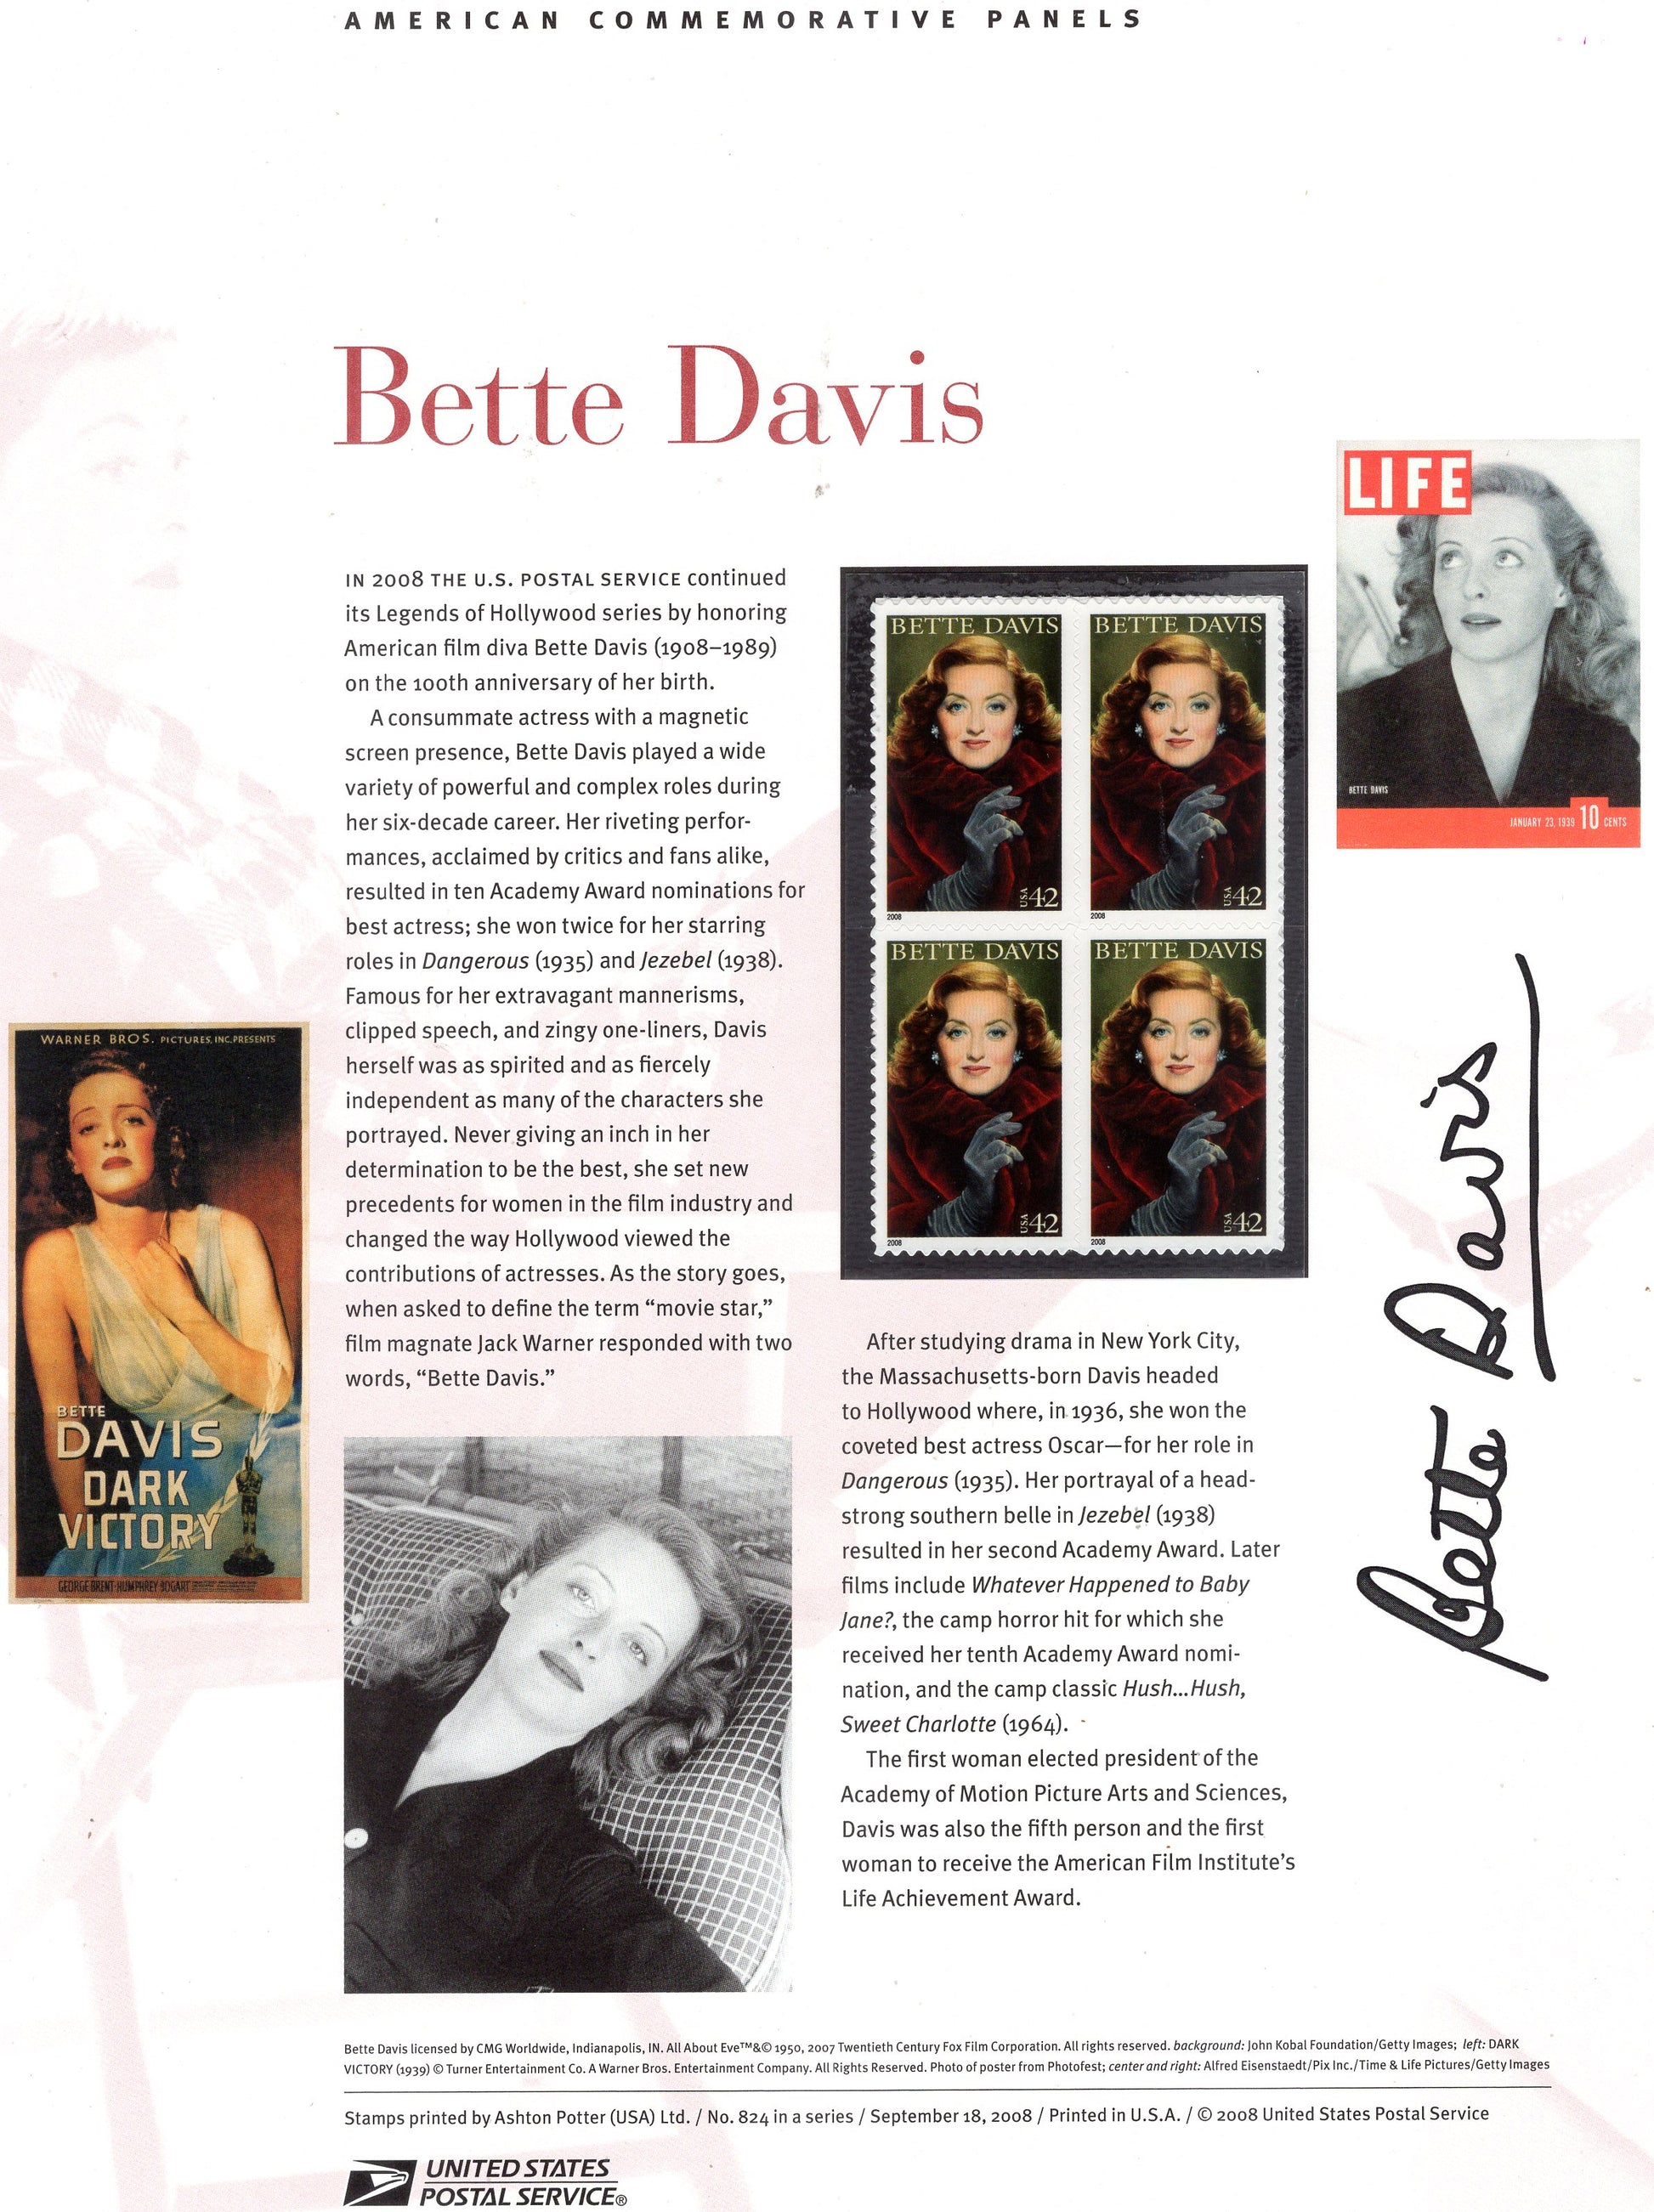 BETTE DAVIS - LEGENDARY ACTRESS - JEZEBEL - DANGEROUS - Special Commemorative Panel with 4 Stamps, Illustrations and Text - Makes a Great Gift - measures about 8.5x11 - Issued 2008